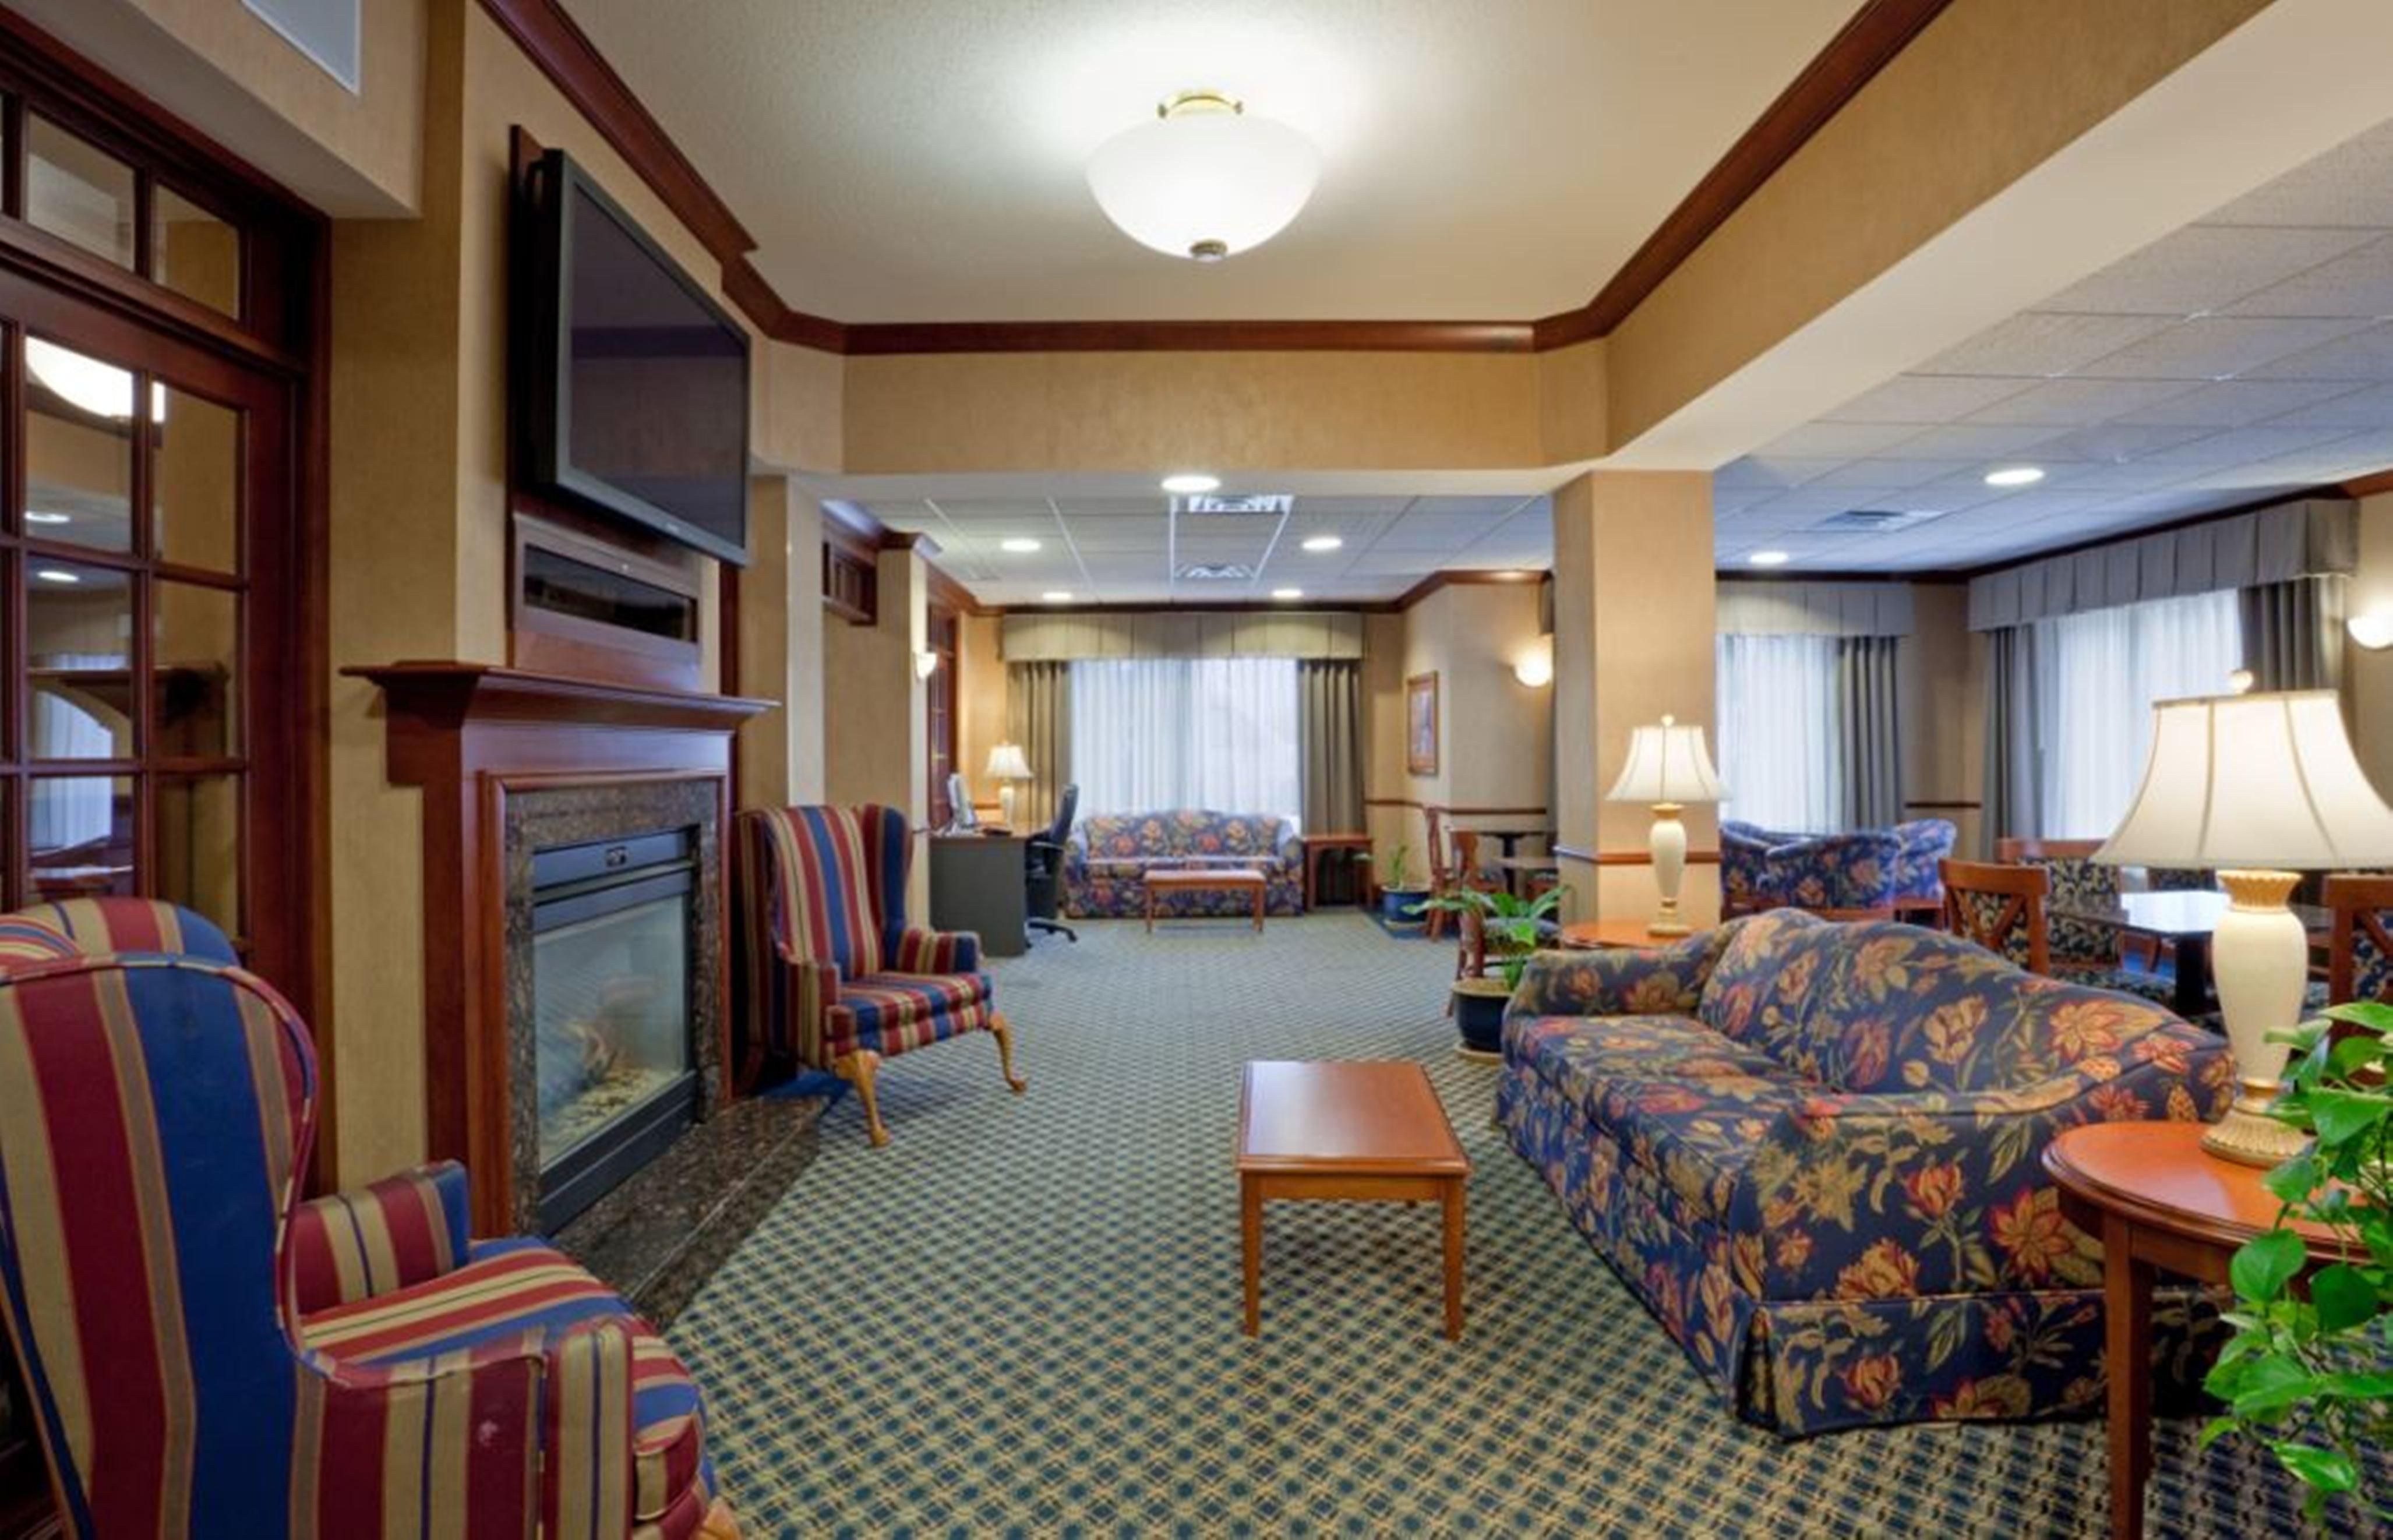 HOLIDAY INN EXPRESS & SUITES AIRPORT